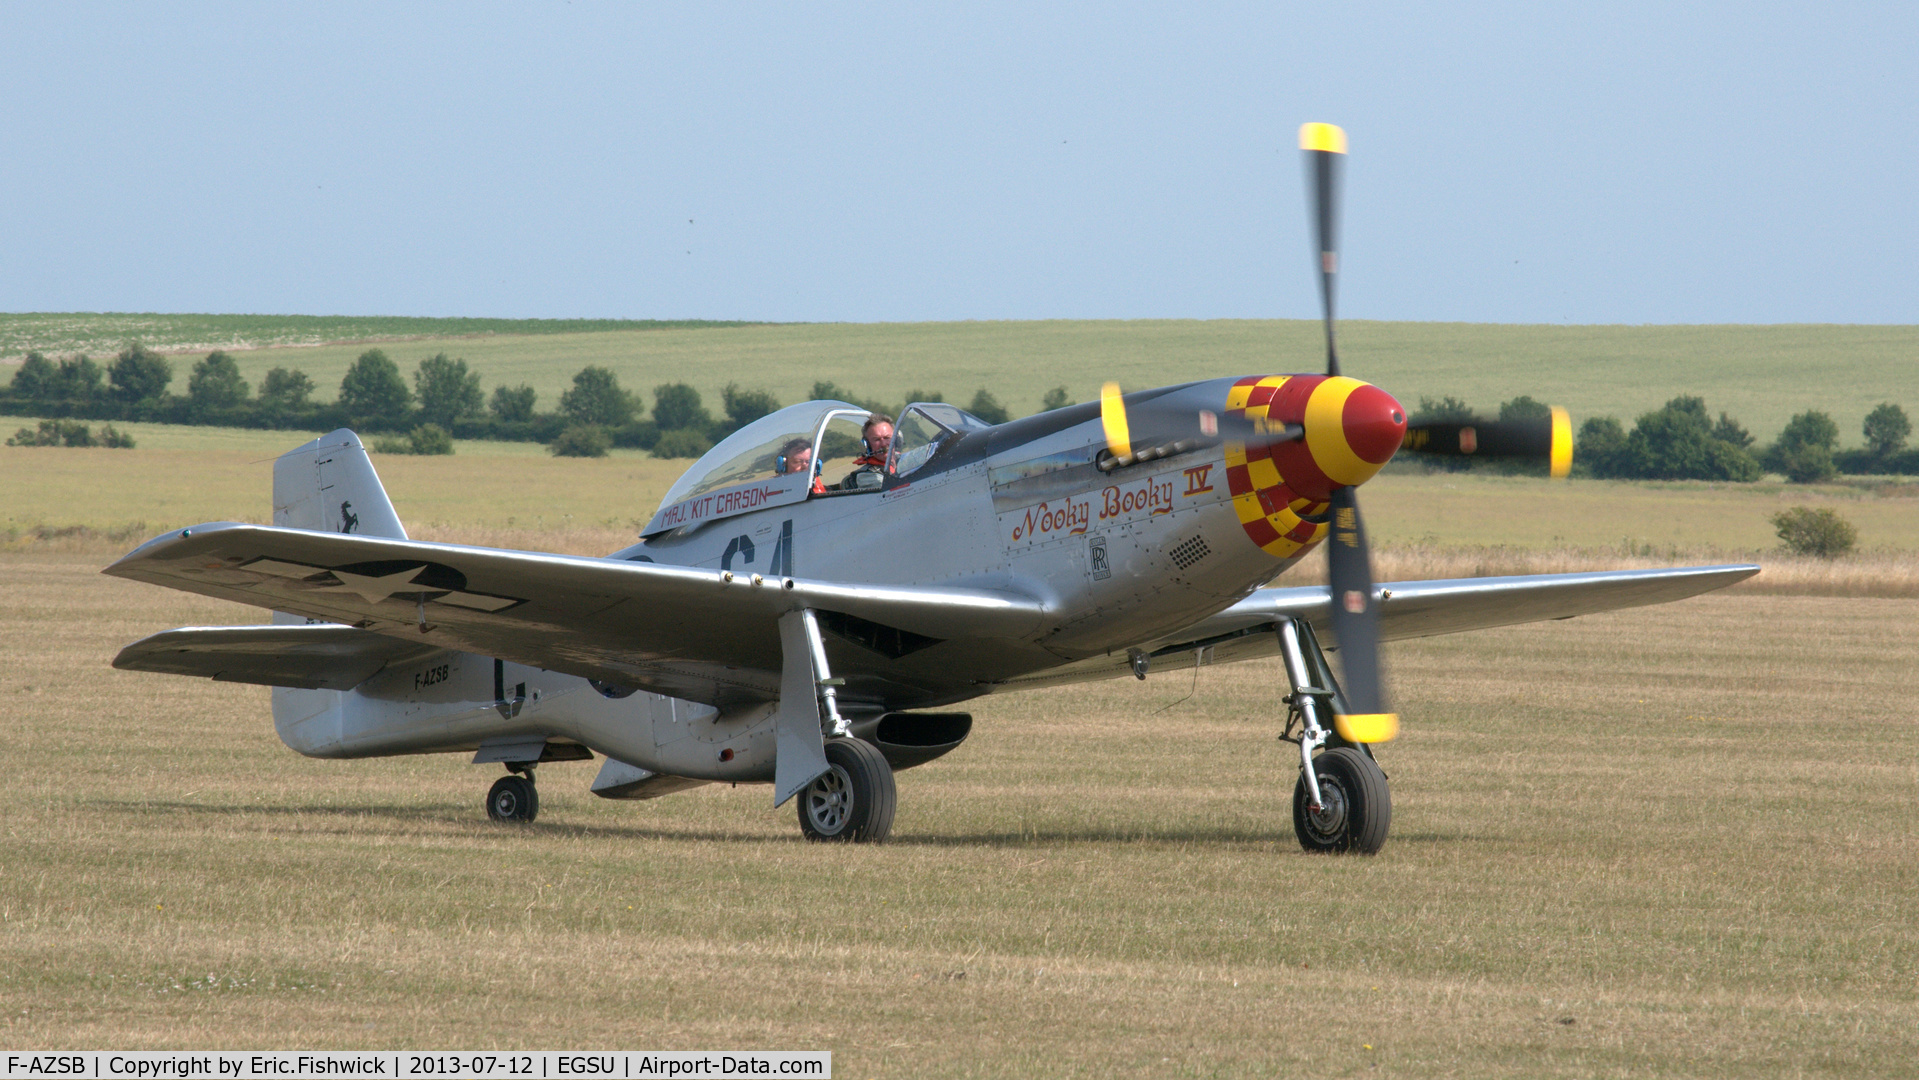 F-AZSB, 1944 North American P-51D Mustang C/N 122-40967, 3. F-AZSB on the eve of Flying Legends Air Show, Duxford - July 2013.